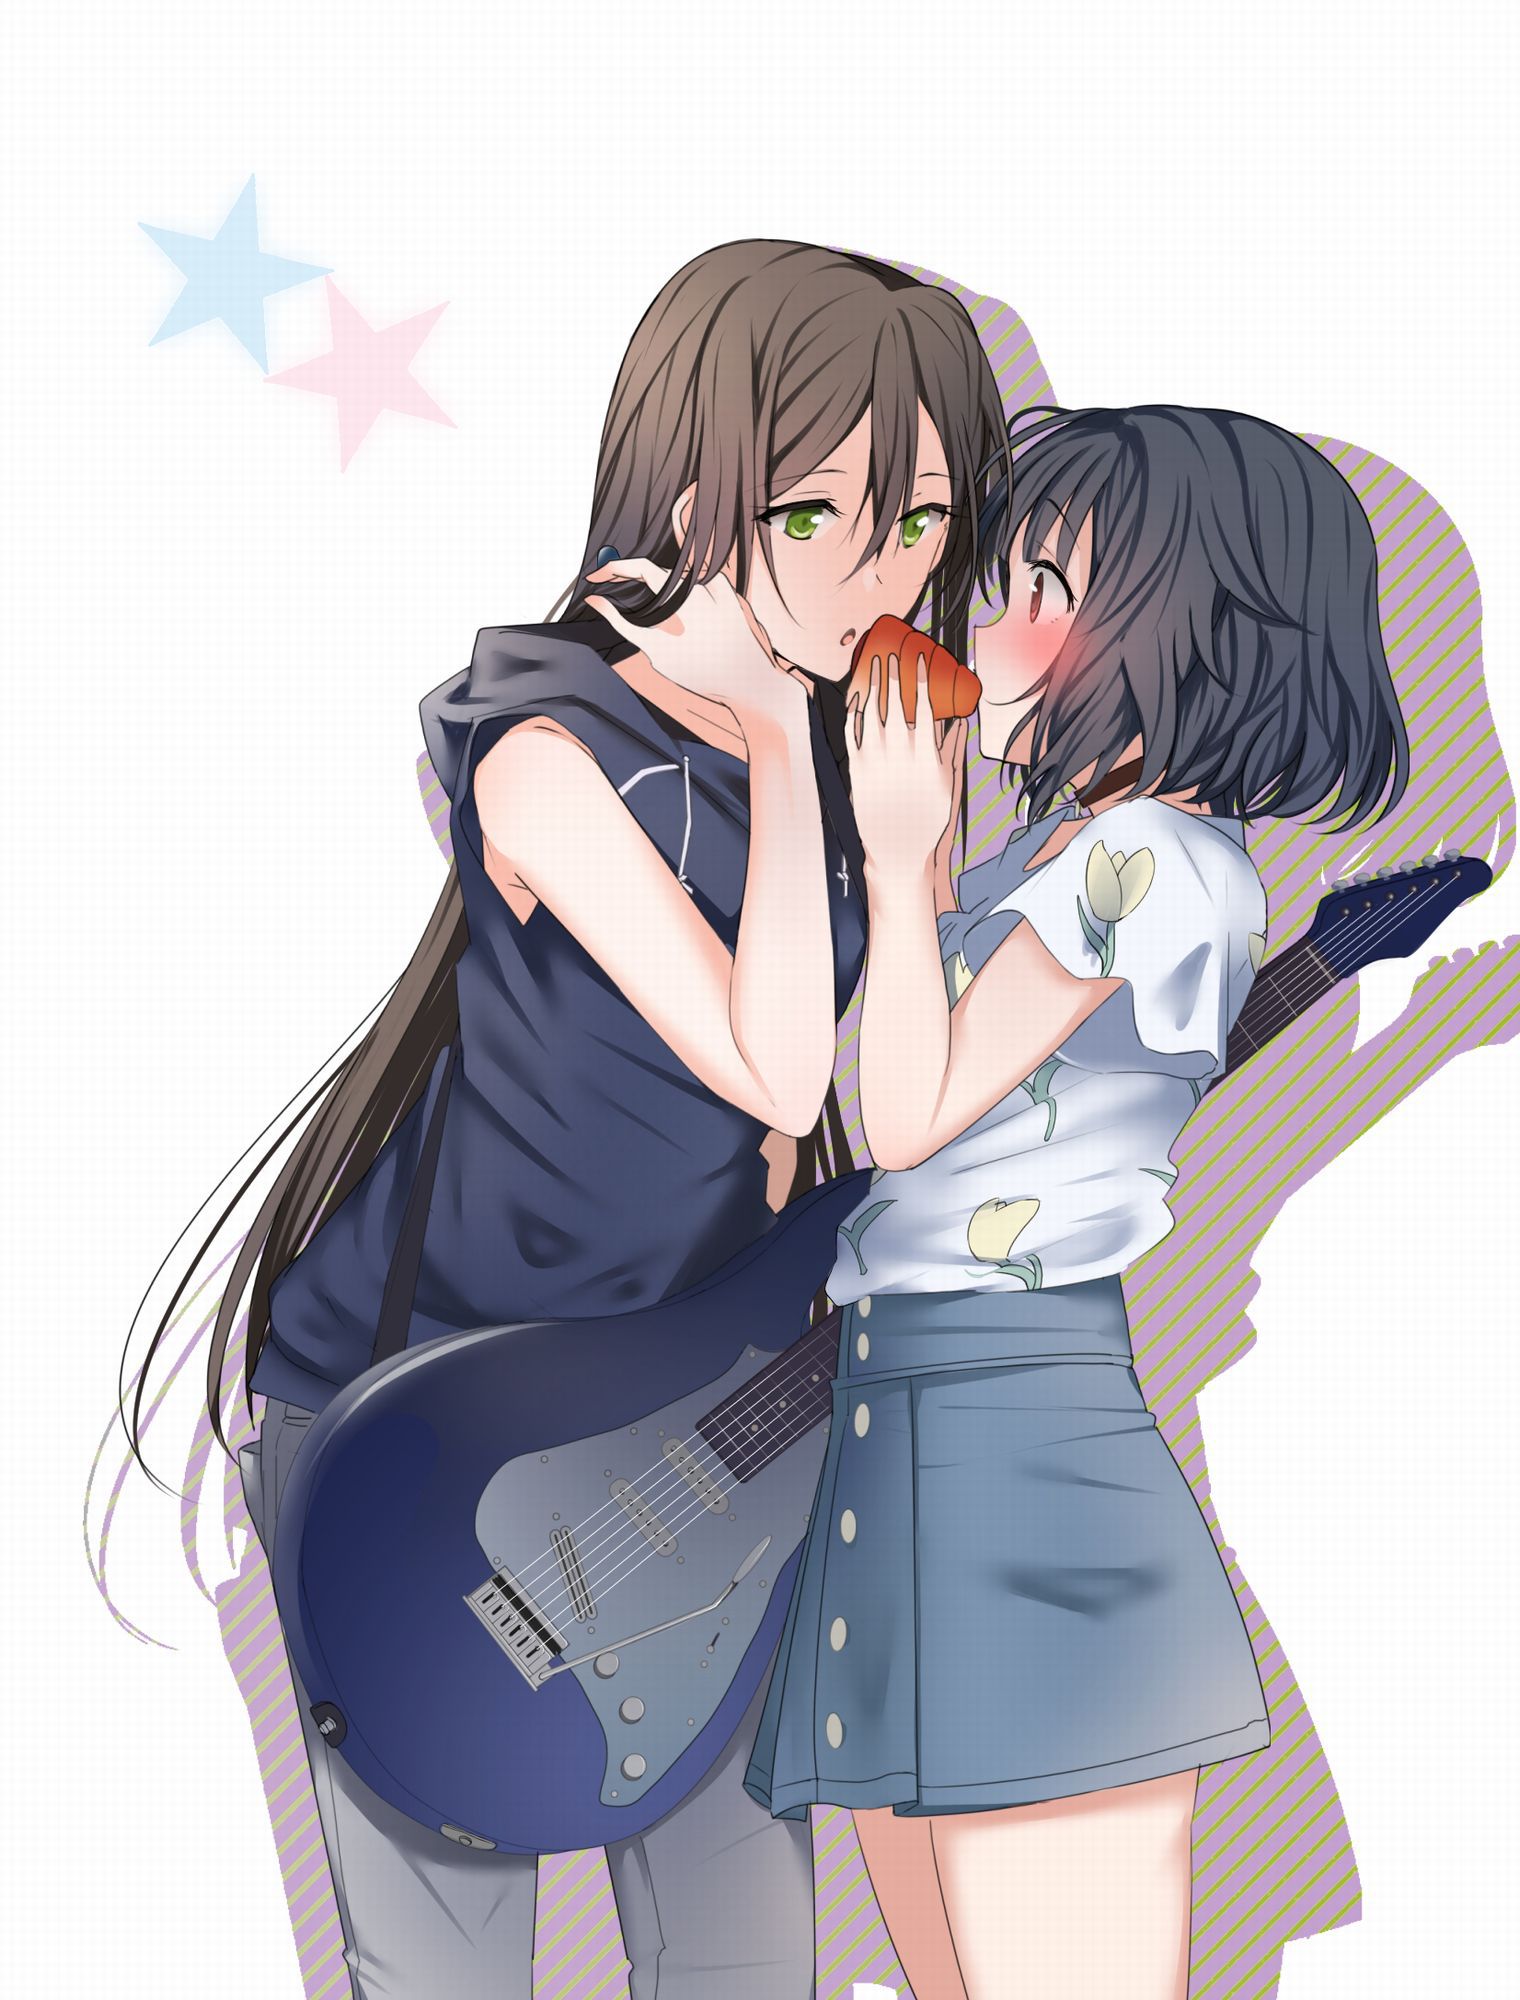 [2nd] Secondary image of the two girls are going to be in the second picture part 11 [Yuri Lesbian] 2